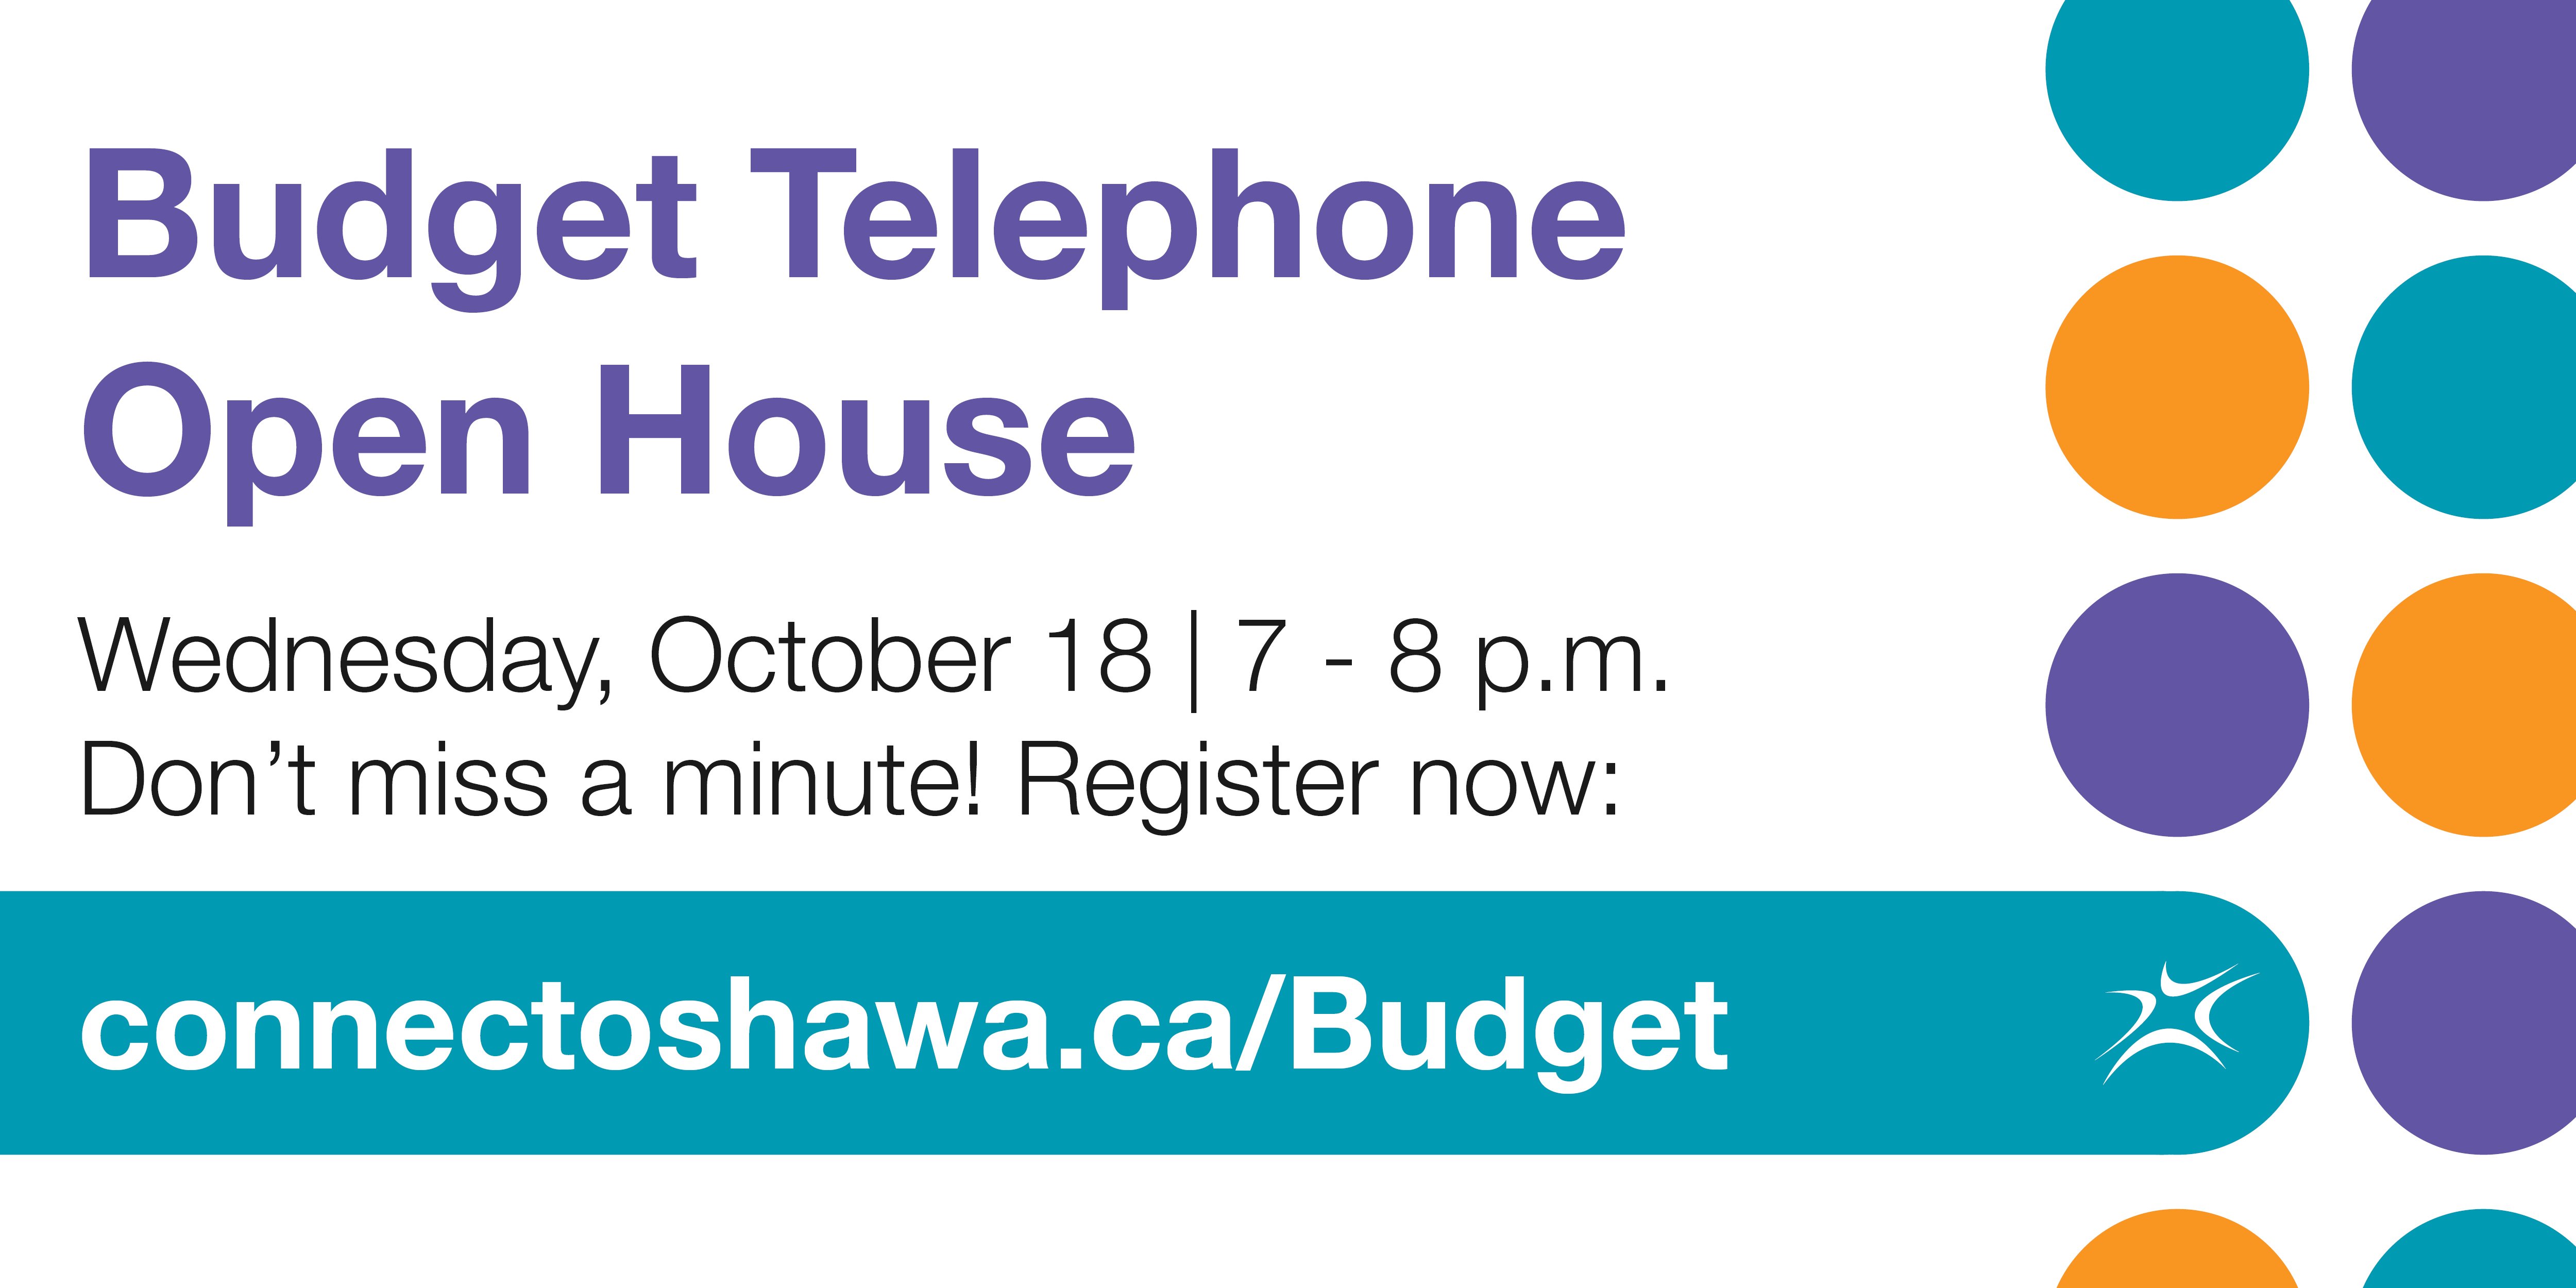 Purple text reading: “Budget Telephone Open House.” Black text reading: “Wednesday, October 18 | 7 – 8 p.m. Don’t miss a minute! Register now:” White text on a teal background reading: “connectoshawa.ca/Budget” Orange, teal and purple dots are on the right side of the image.